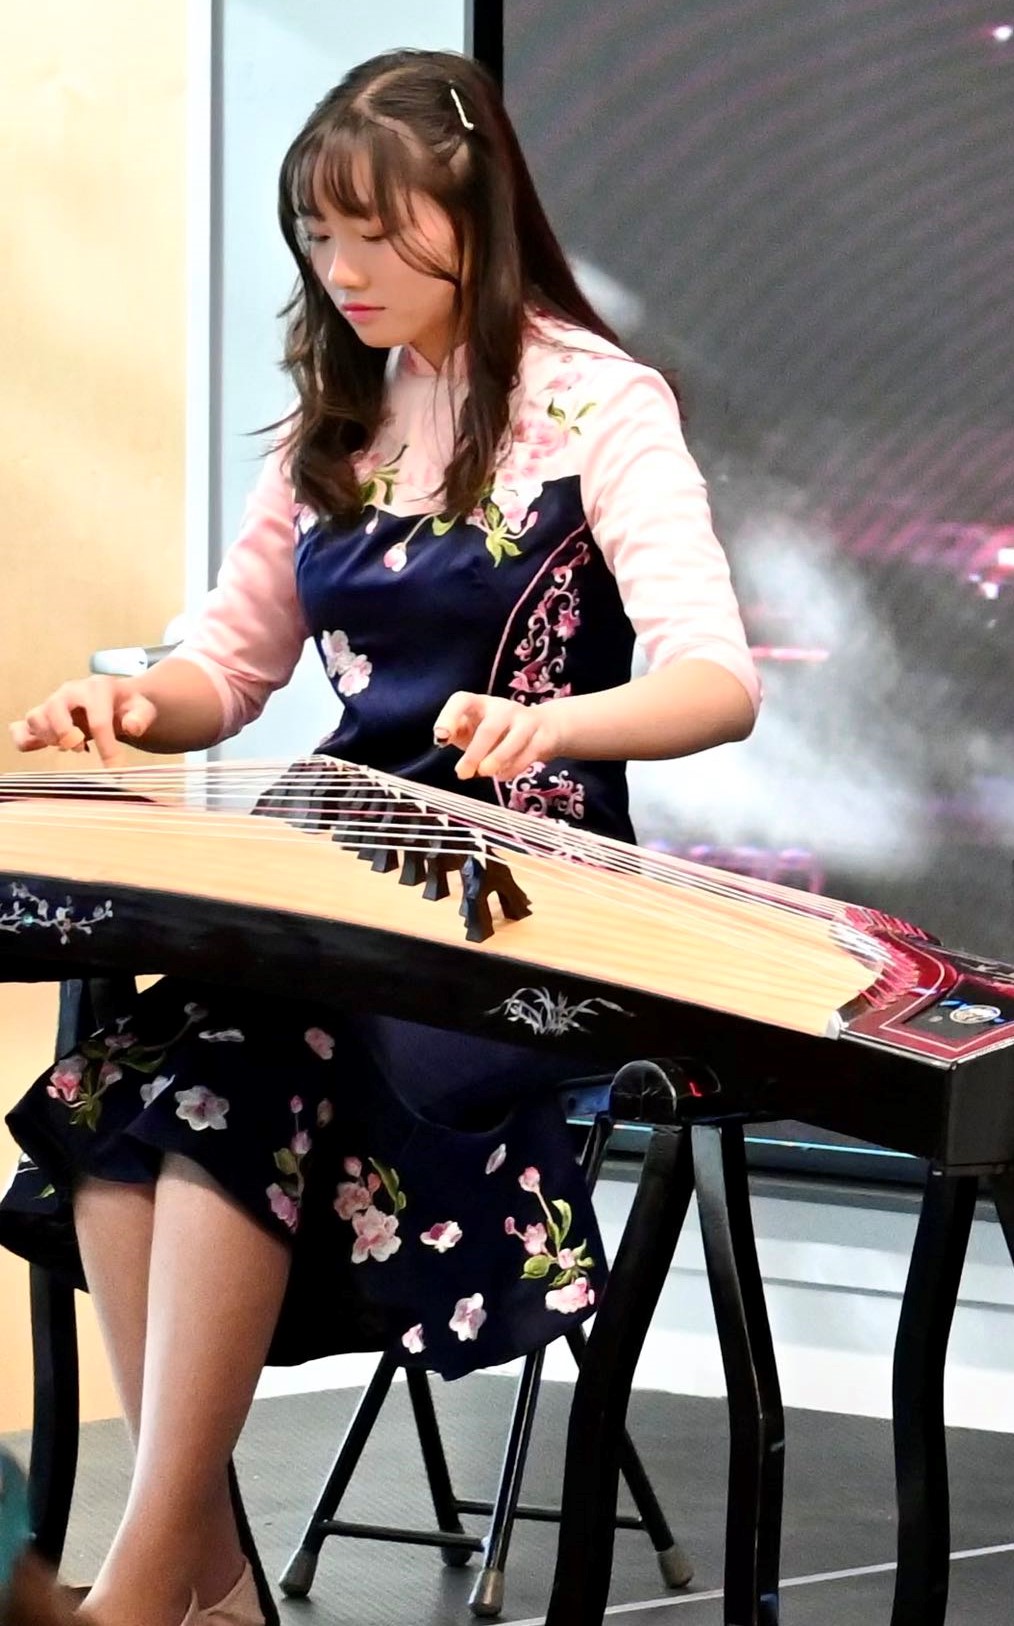 Tiffany playing Zither 